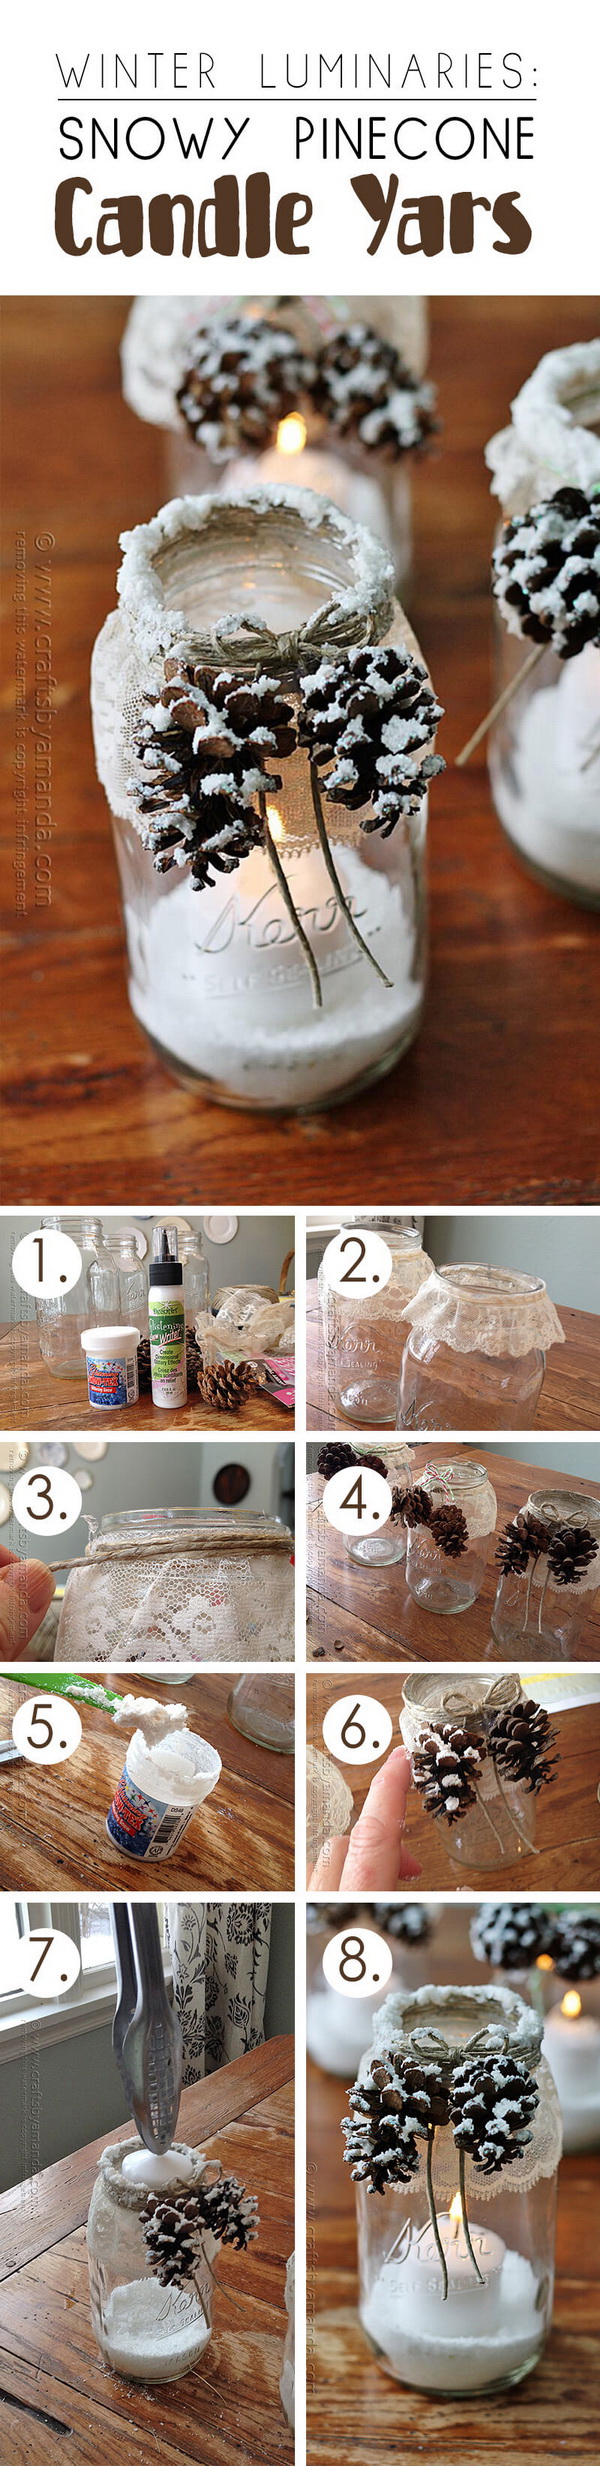 Snowy Pinecone Candle Jars. 